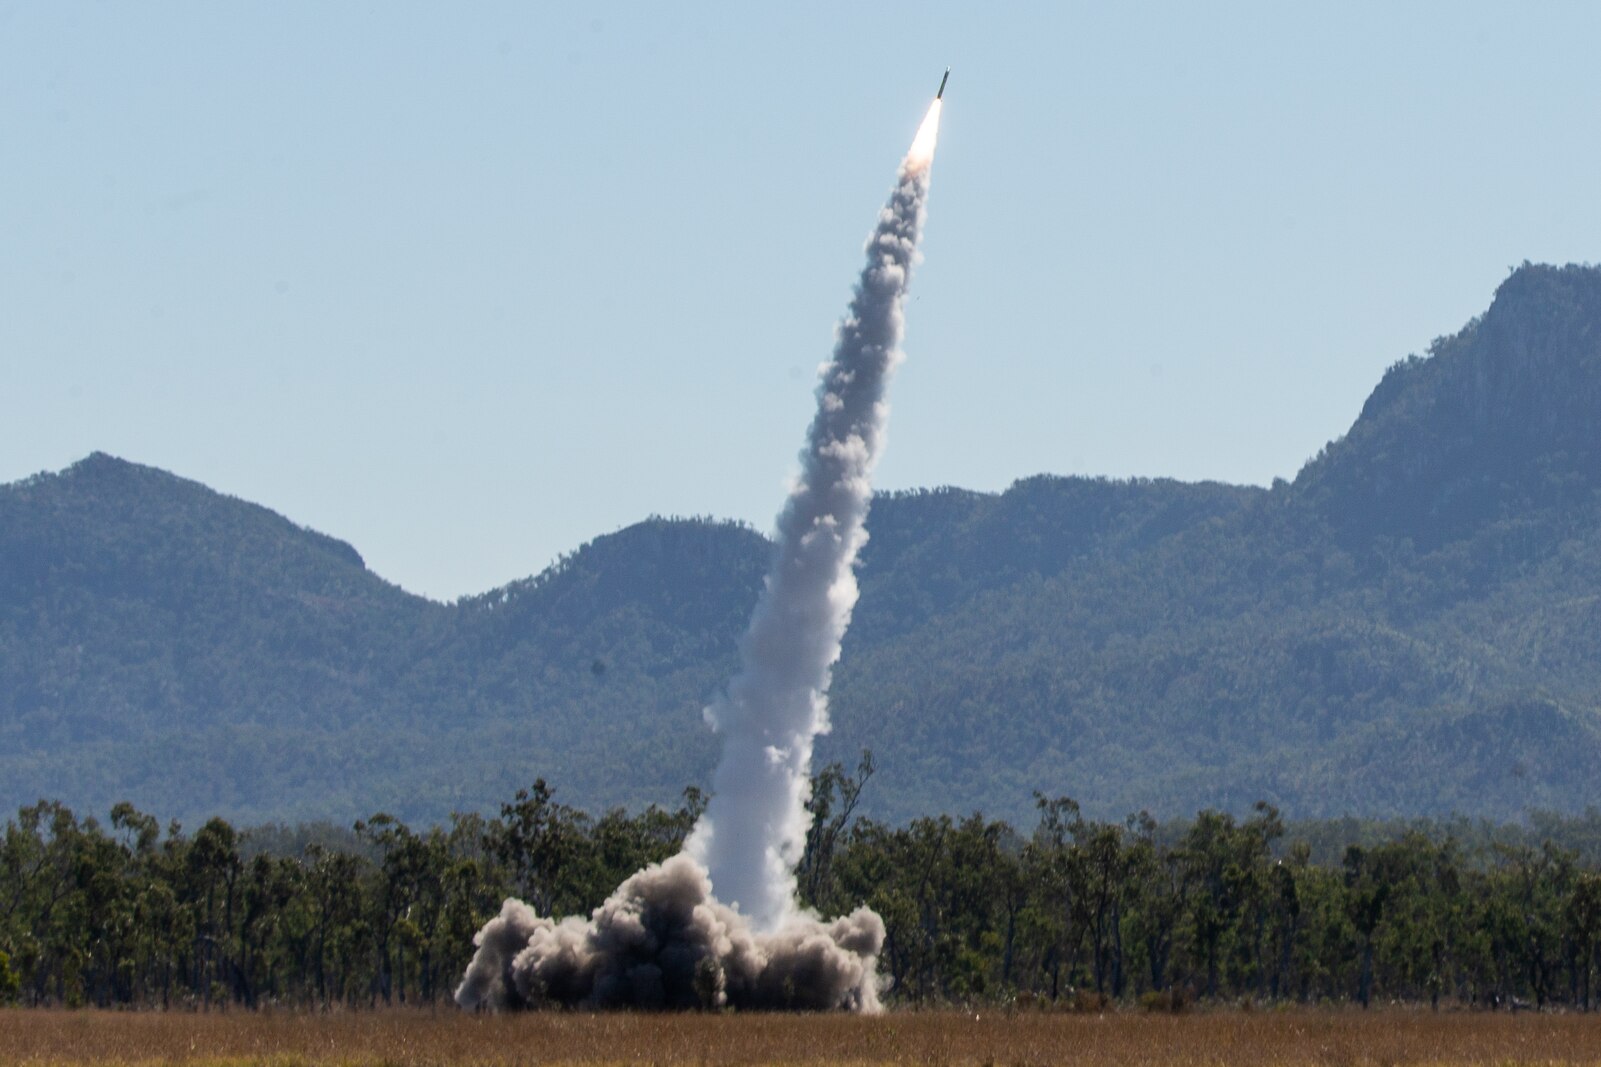 U.S. Marines with 3d Battalion, 12th Marines, 3d Marine Division, fire GMLRS rockets from a High Mobility Artillery Rocket System during Exercise Talisman Sabre 21 on Shoalwater Bay Training Area, Queensland, Australia, July 19, 2021. TS21 supports the U.S. National Defense Strategy by enhancing the ability to protect the homeland and provide combat-credible forces to address the full range of potential security concerns in the Indo-Pacific (U.S. Marine Corps photo by Lance Cpl. Ujian Gosun)